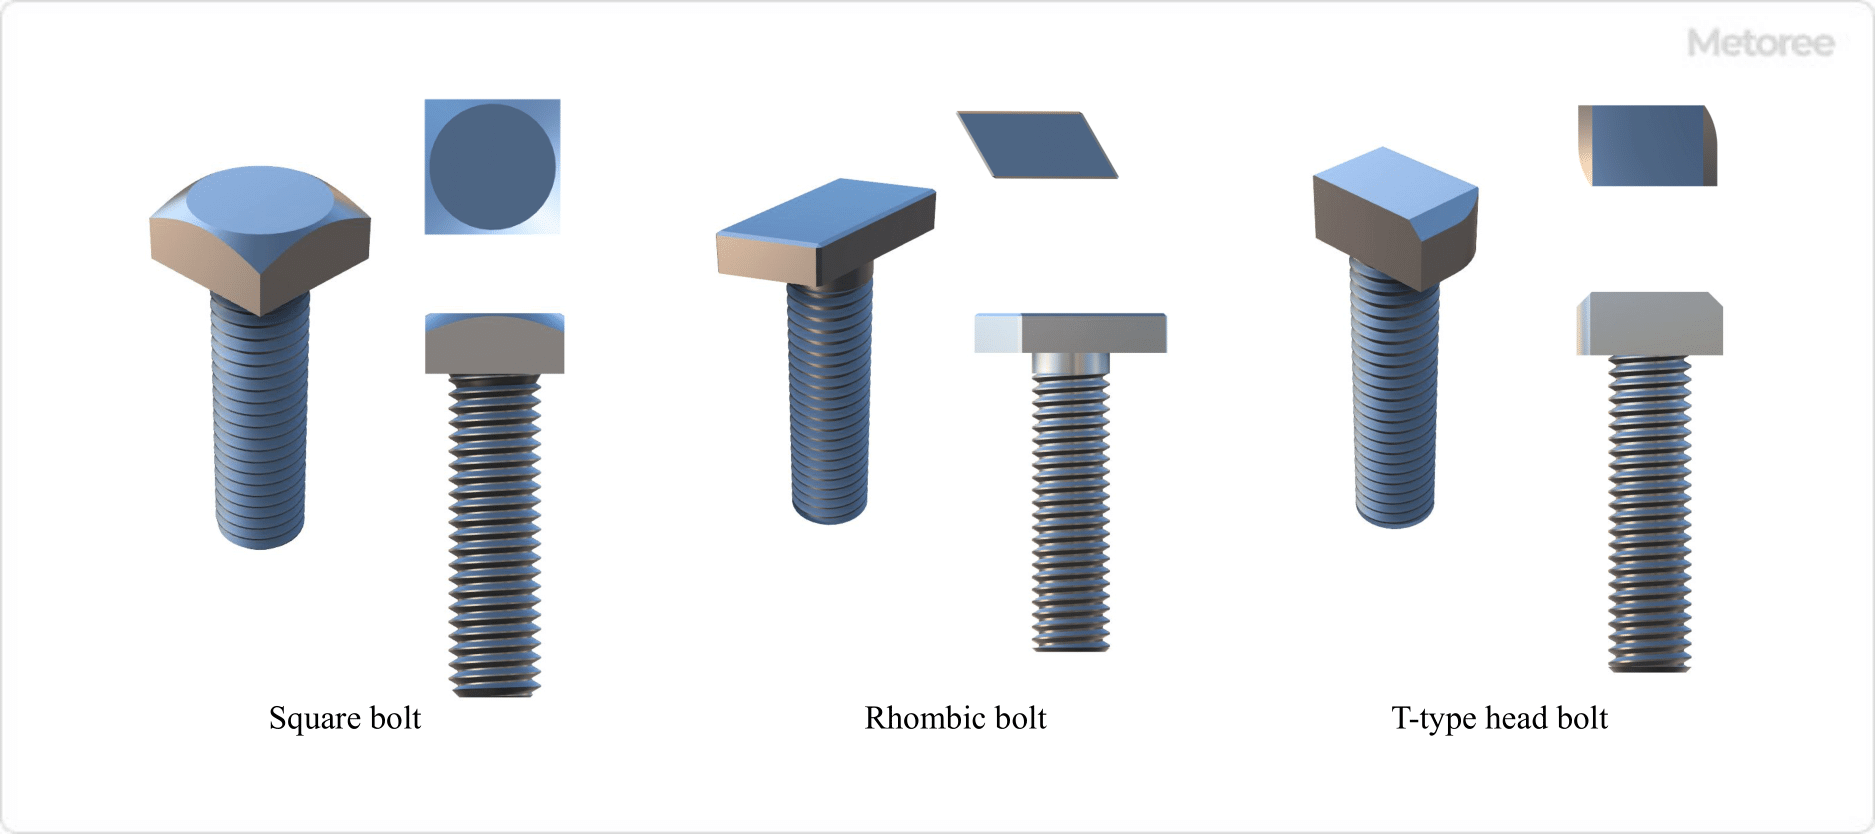 Figure 1. Shapes of square, Rhombic, and T-type head bolt